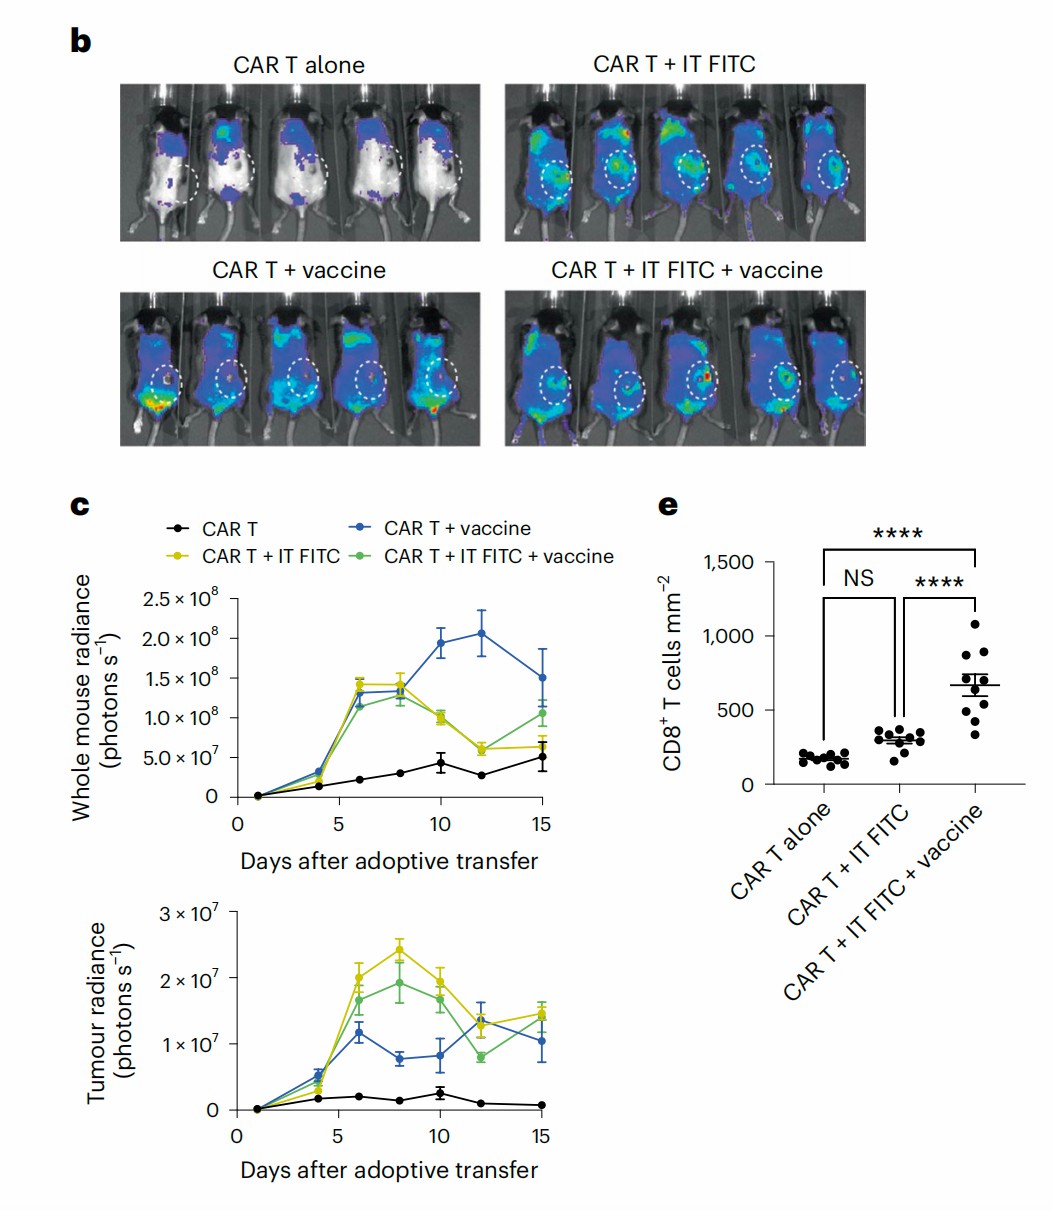 Anti-FITC CAR-T cell expansion after amph-FITC injection. (Zhang, et al., 2023)